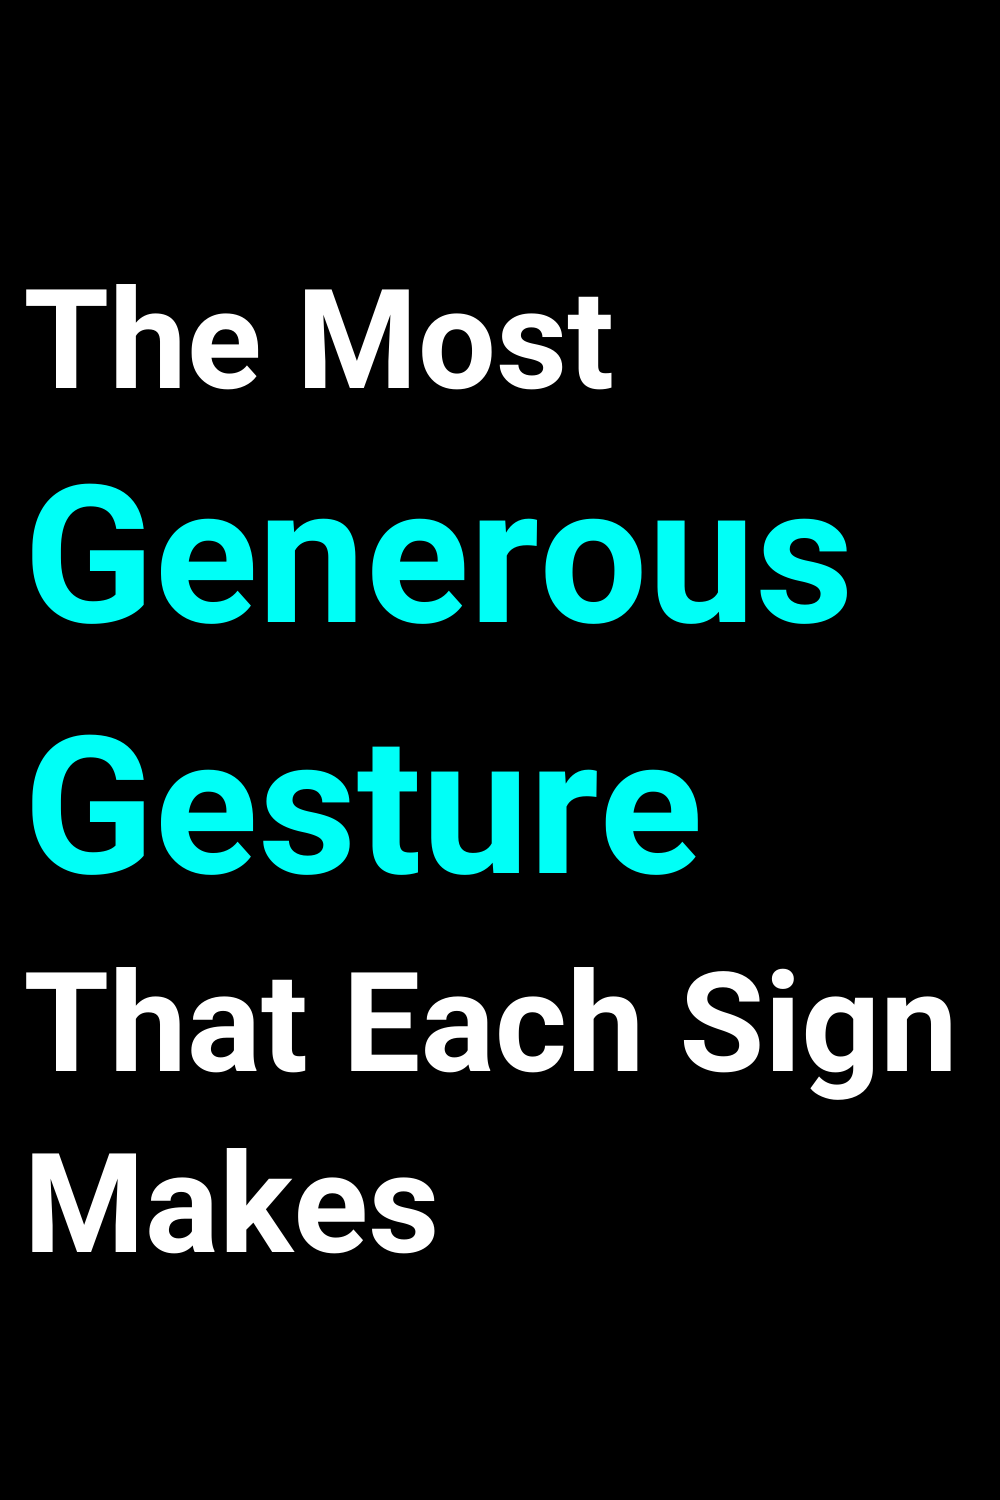 The Most Generous Gesture That Each Sign Makes